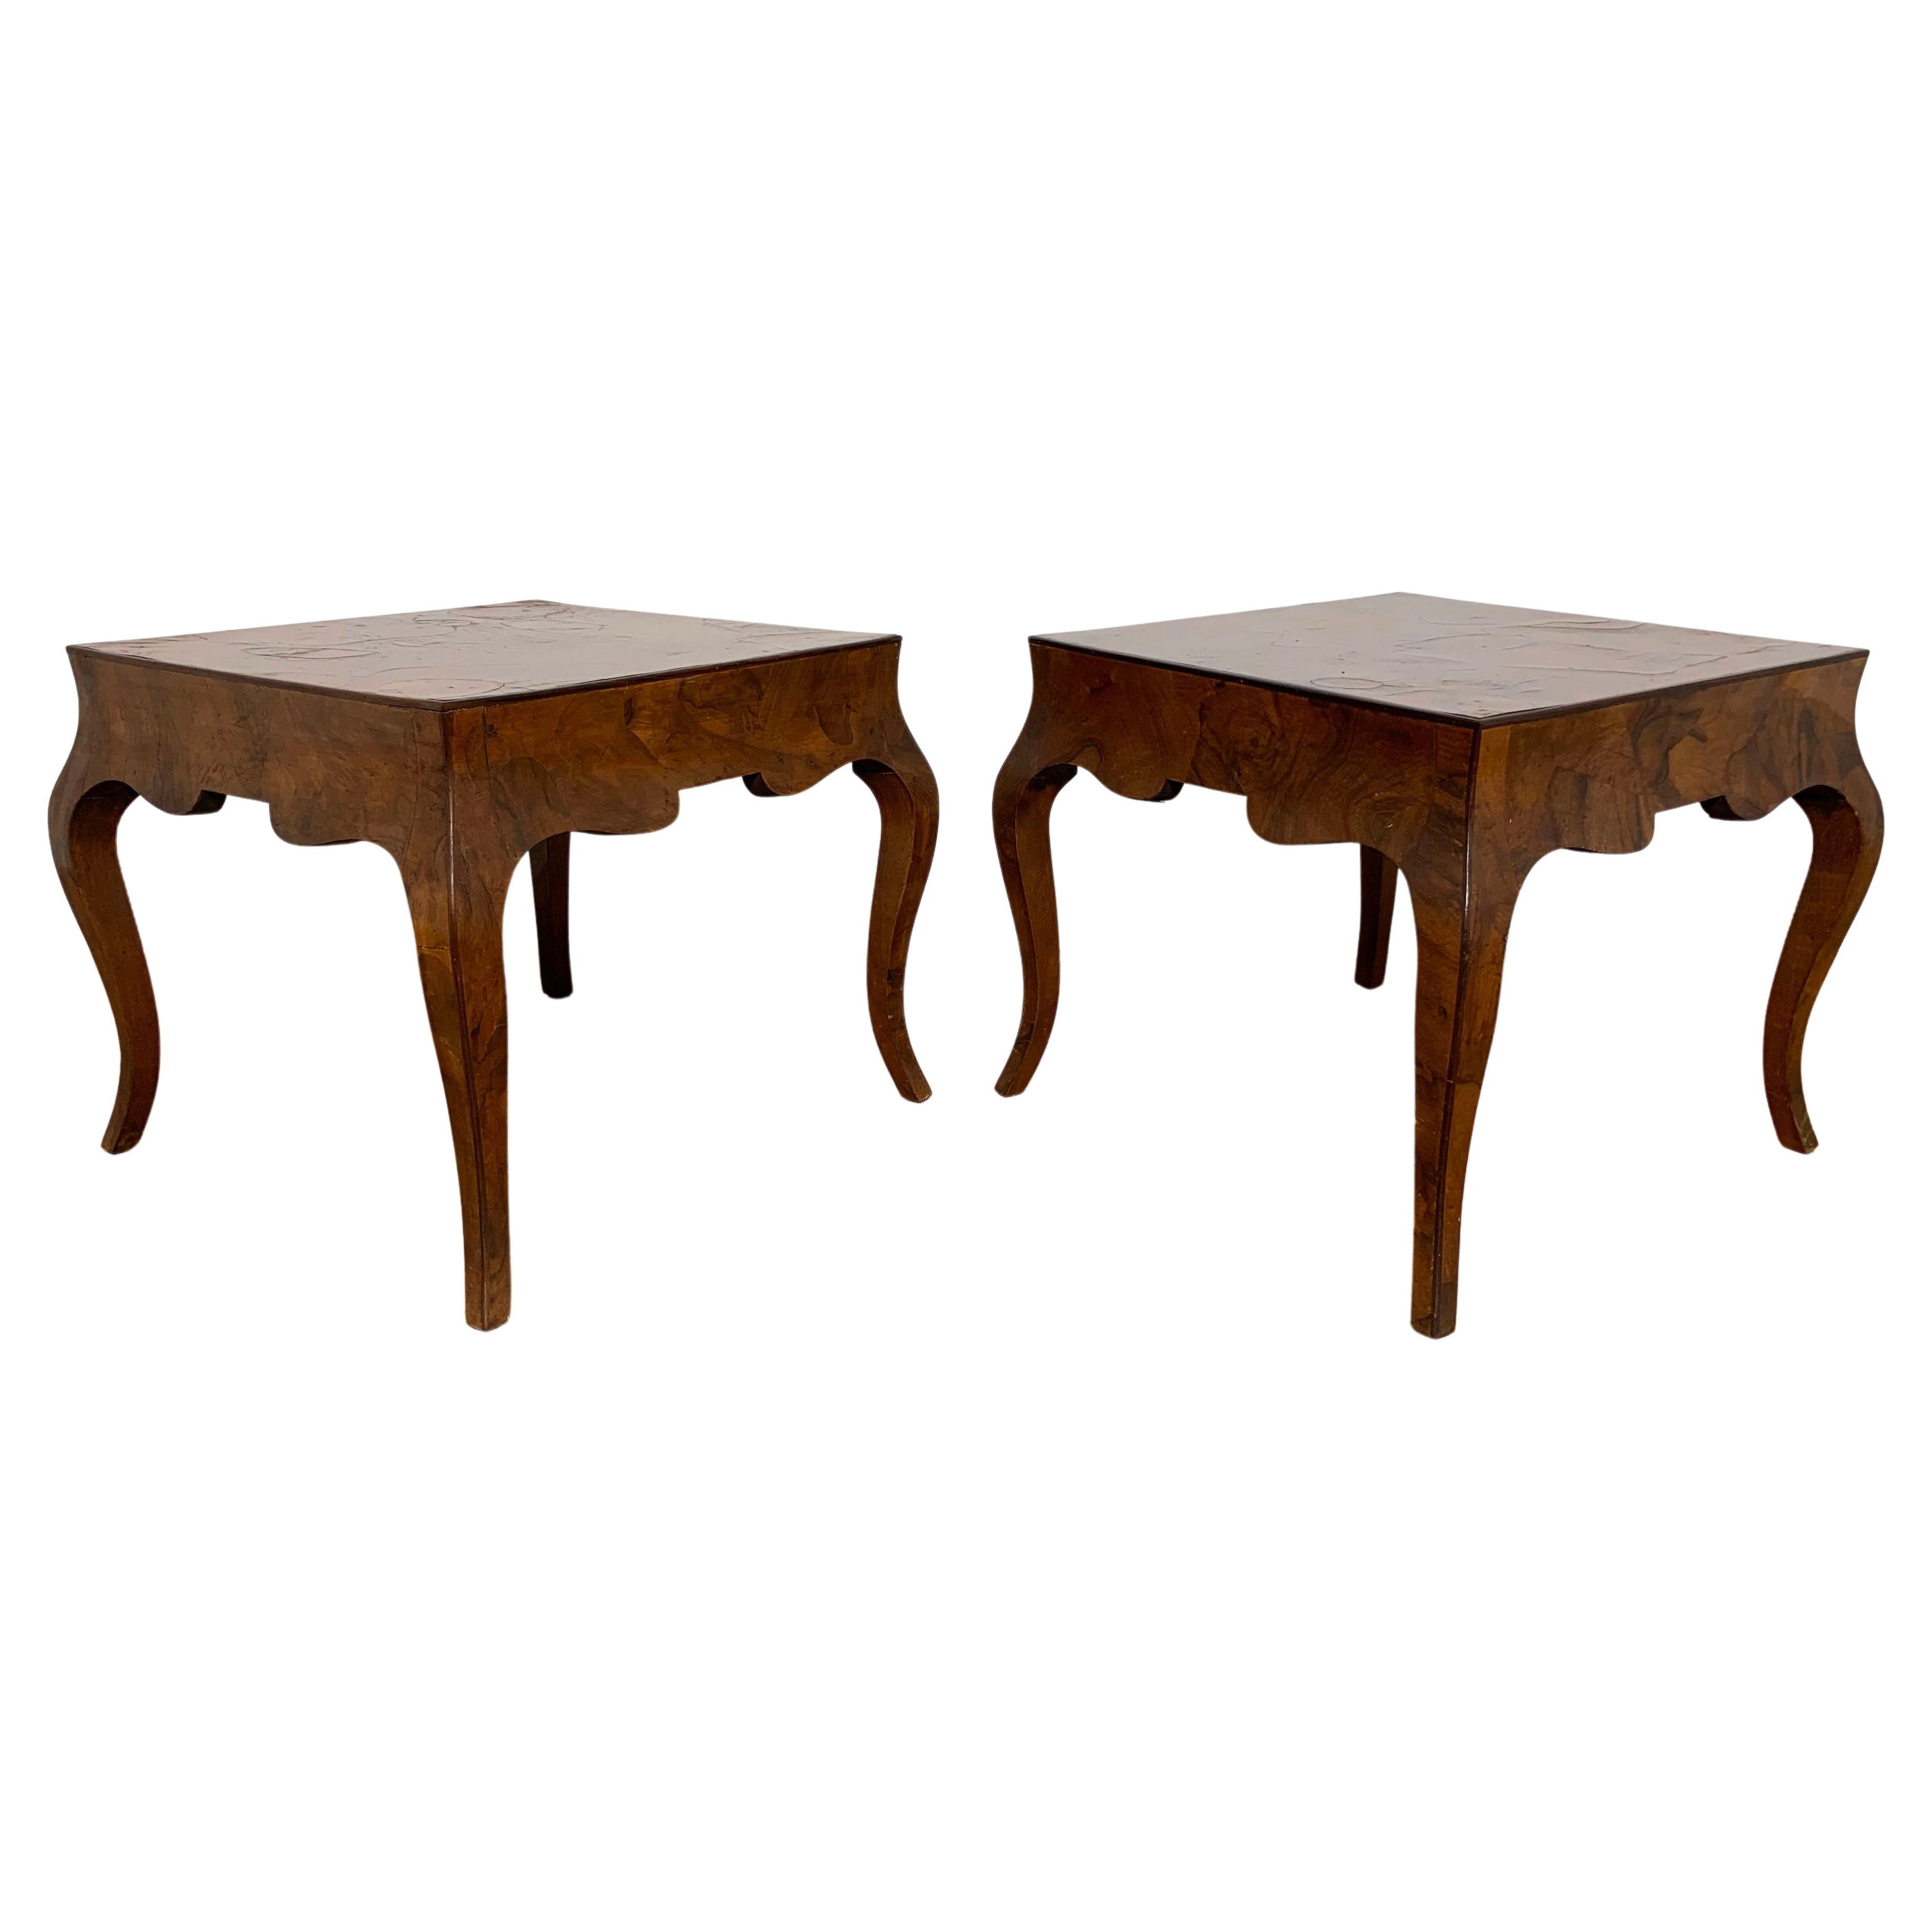 Pair of Italian Oyster Burl Wood Side Tables, Circa 1950s